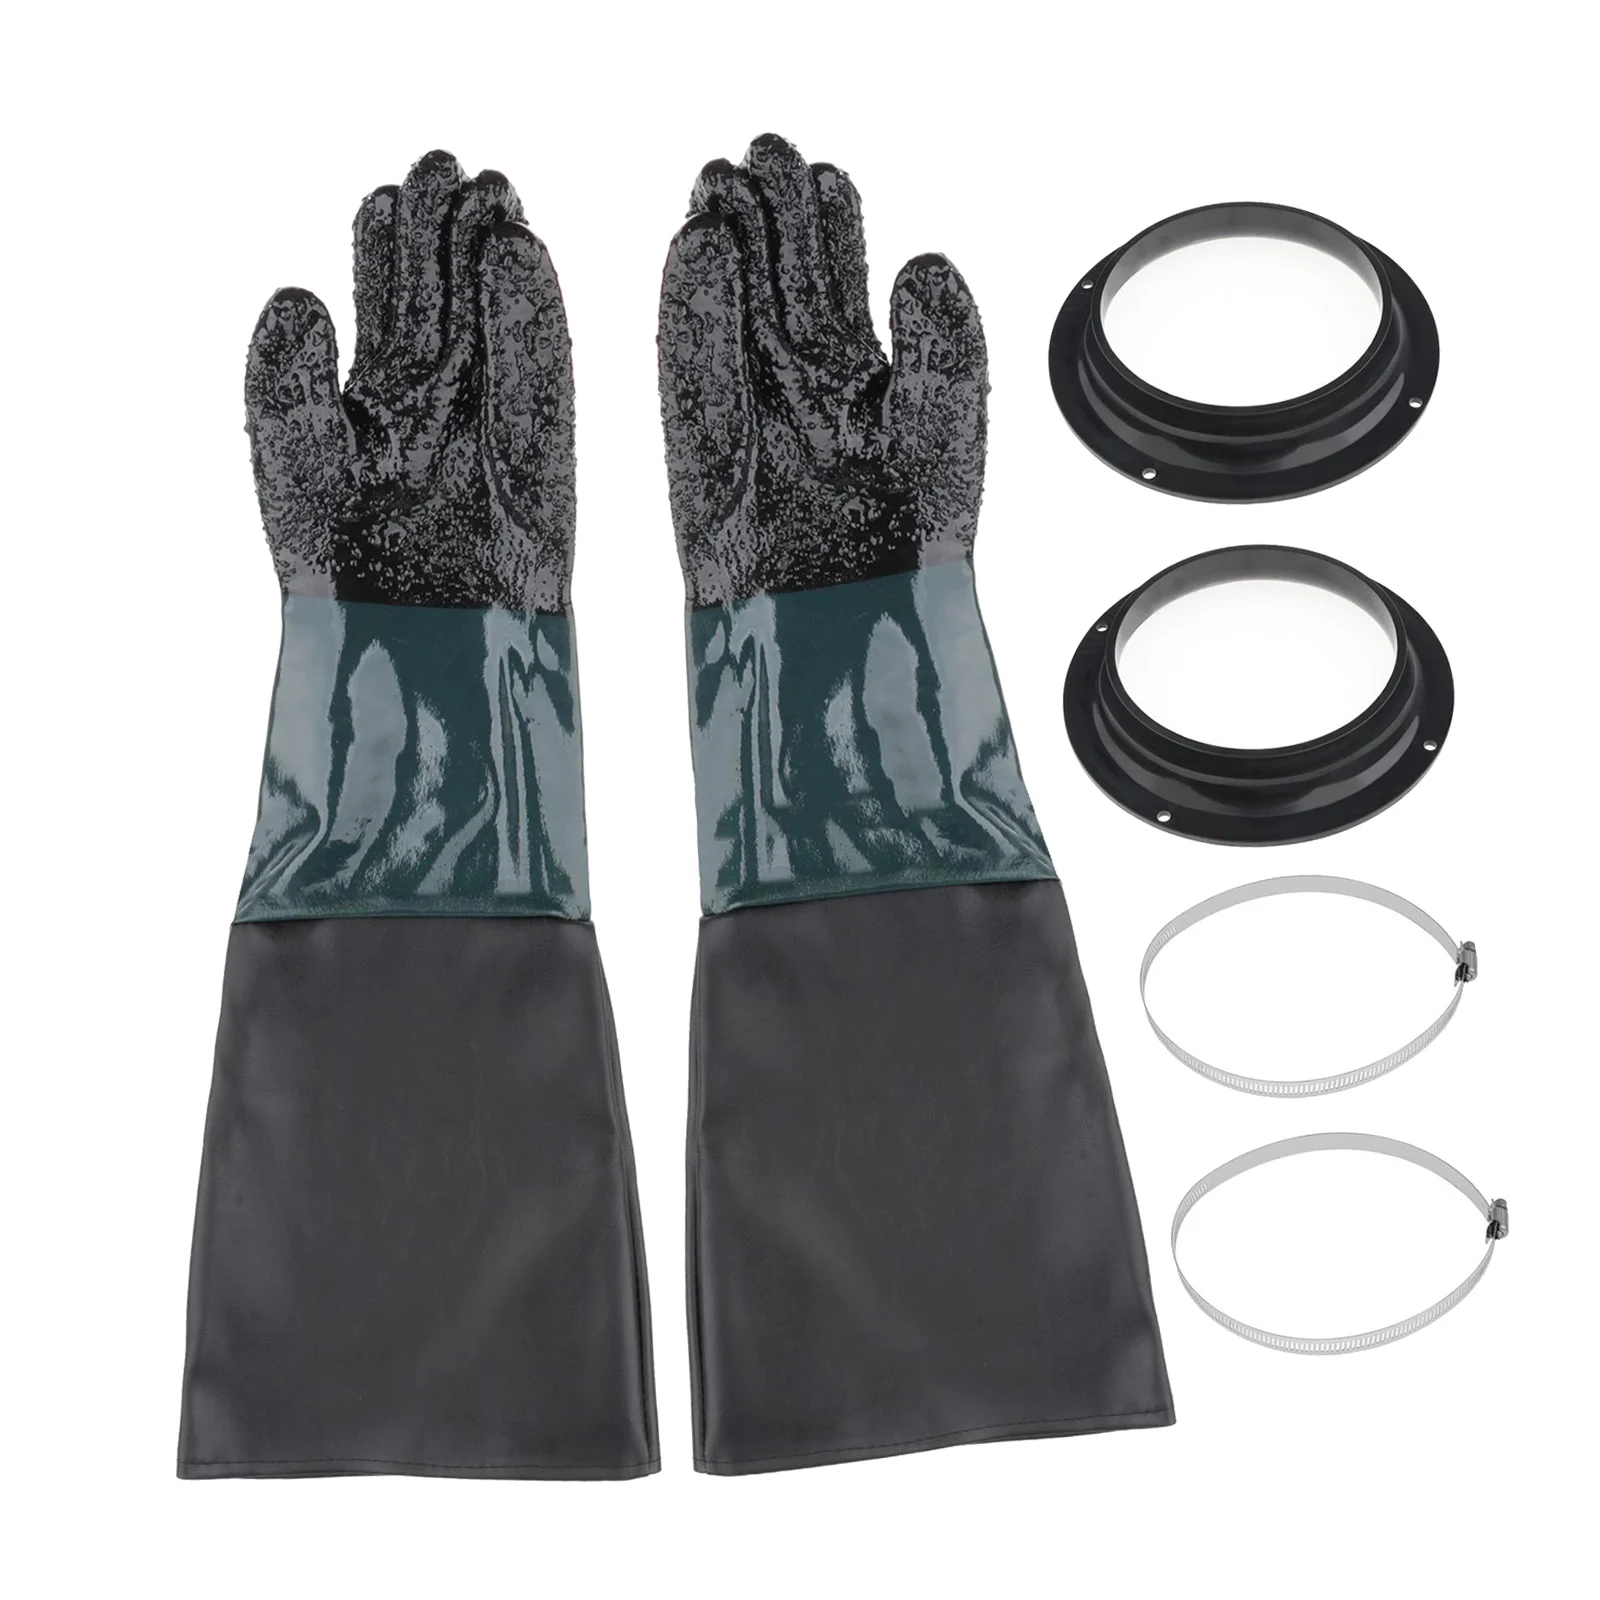 6" x 24" SYNTHETIC LEATHER UPPER Sandblast Gloves Pair Highly Durable 